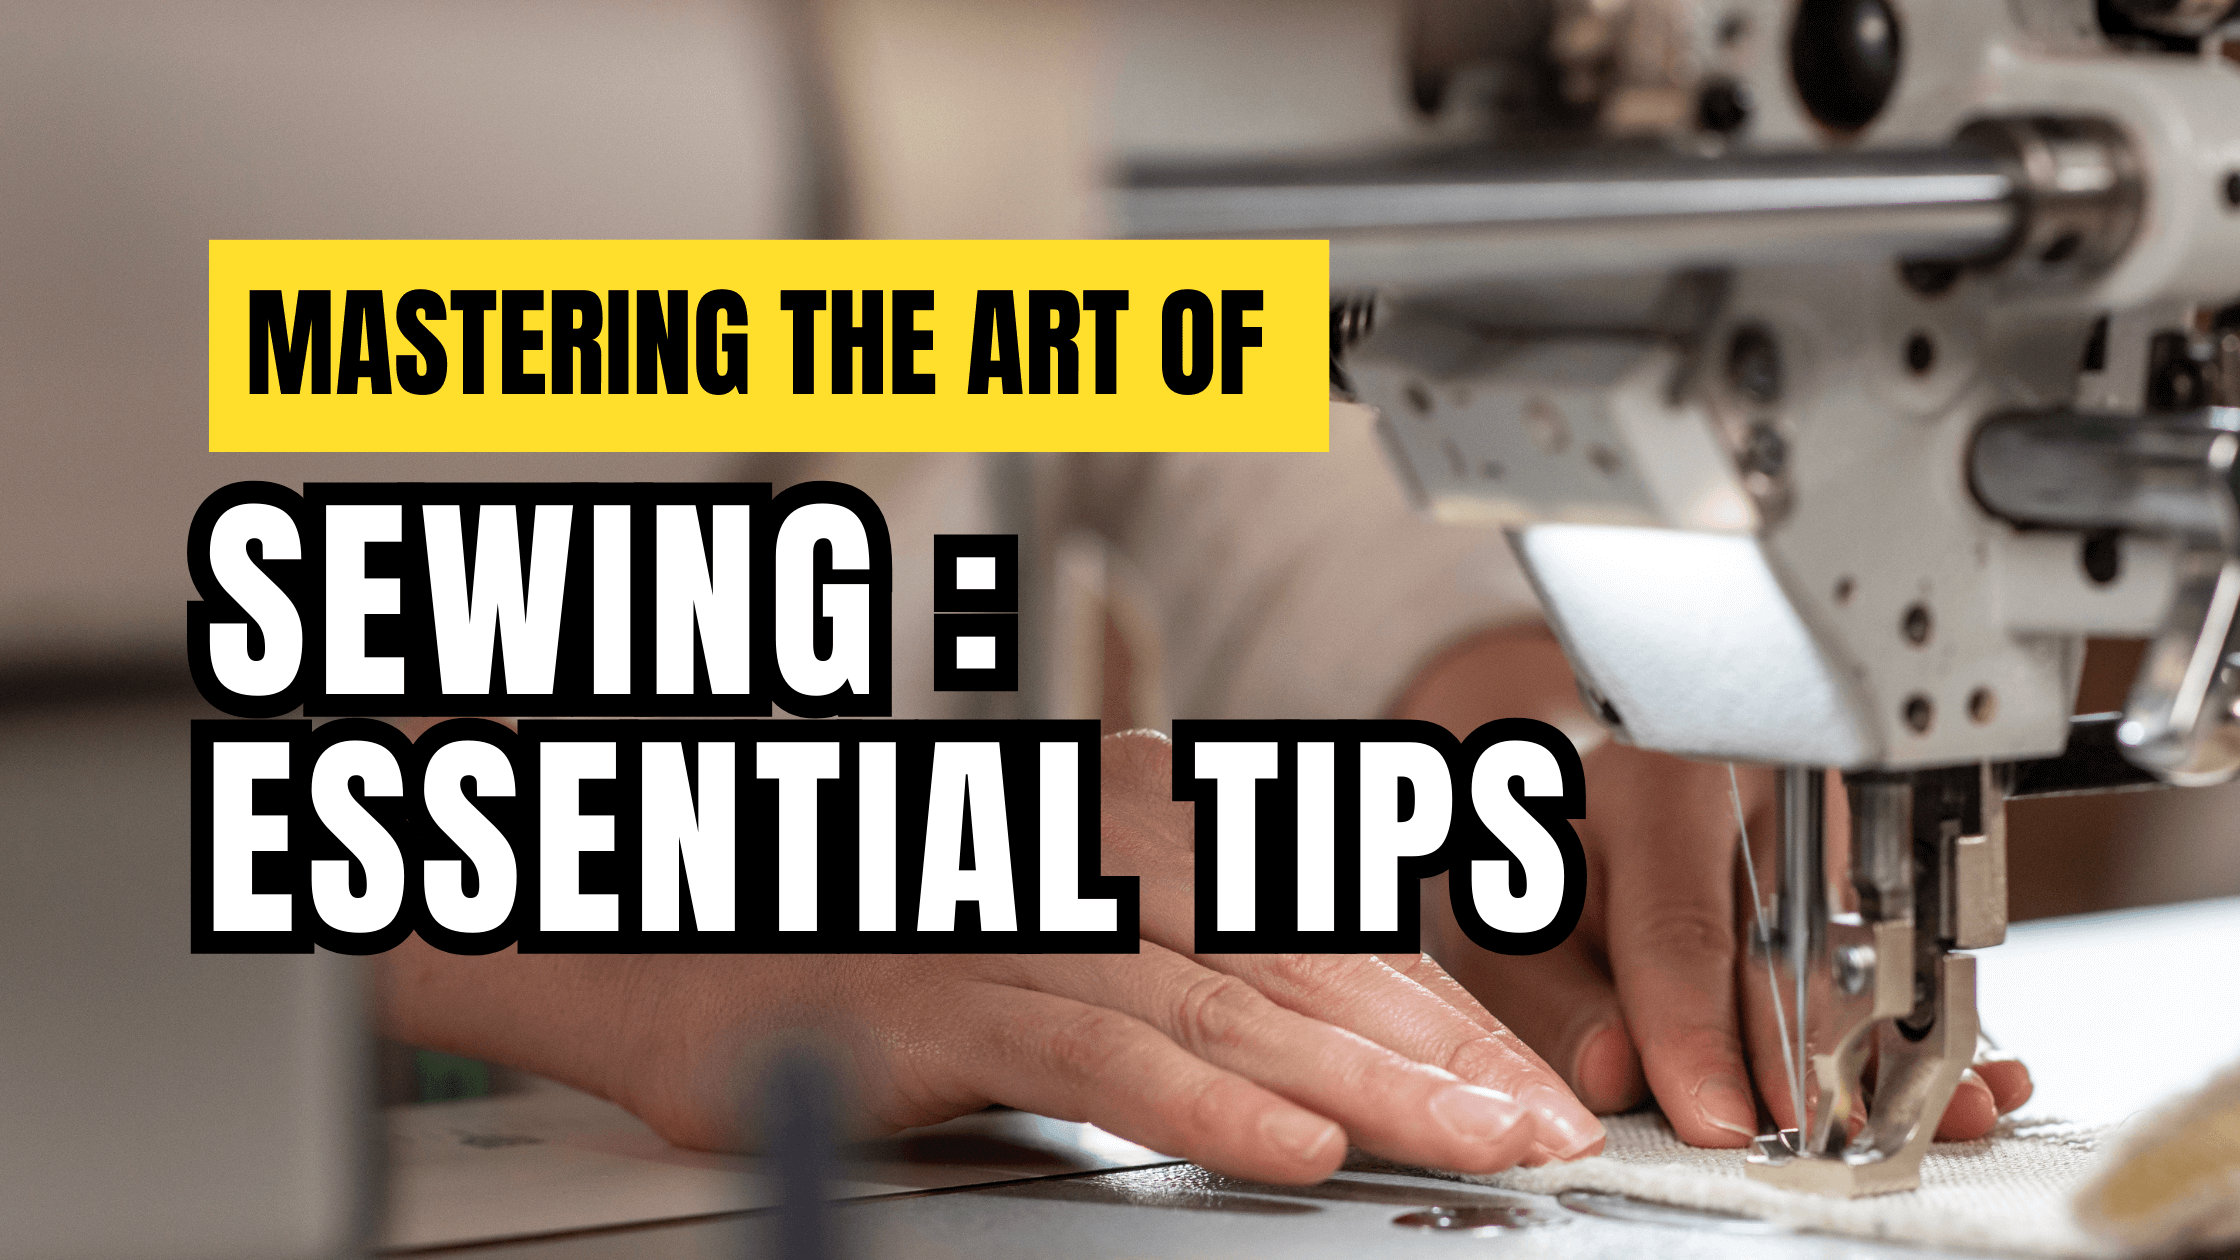 Mastering the Art of Sewing: Essential Tips for Using a Sewing Machine